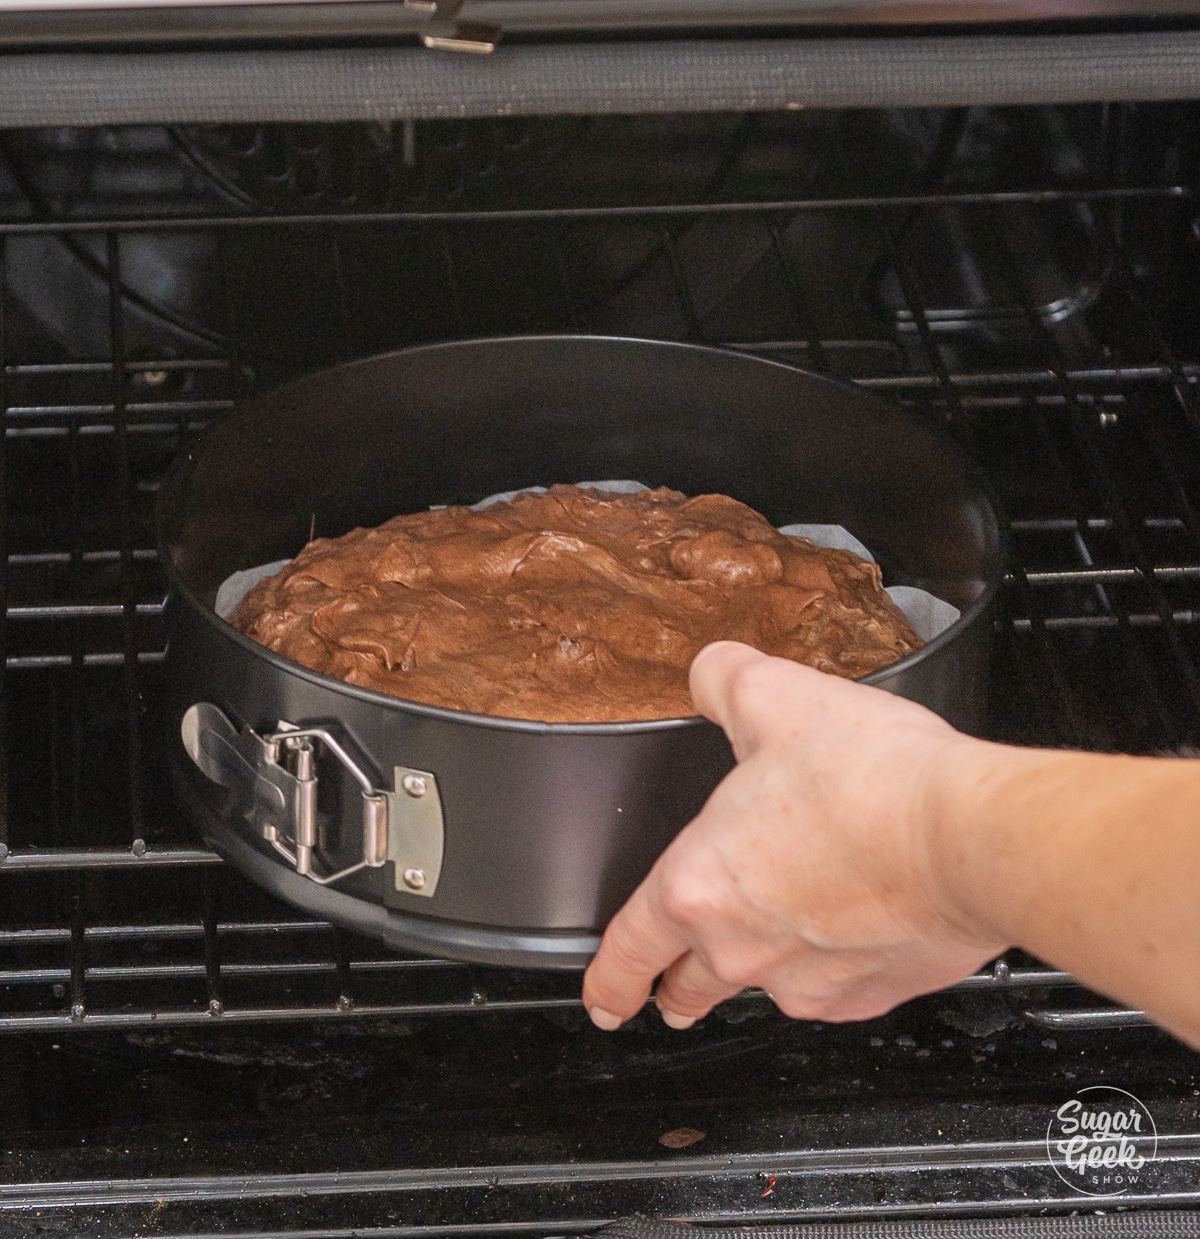 hand placing a springform pan of chocolate cake batter in the oven